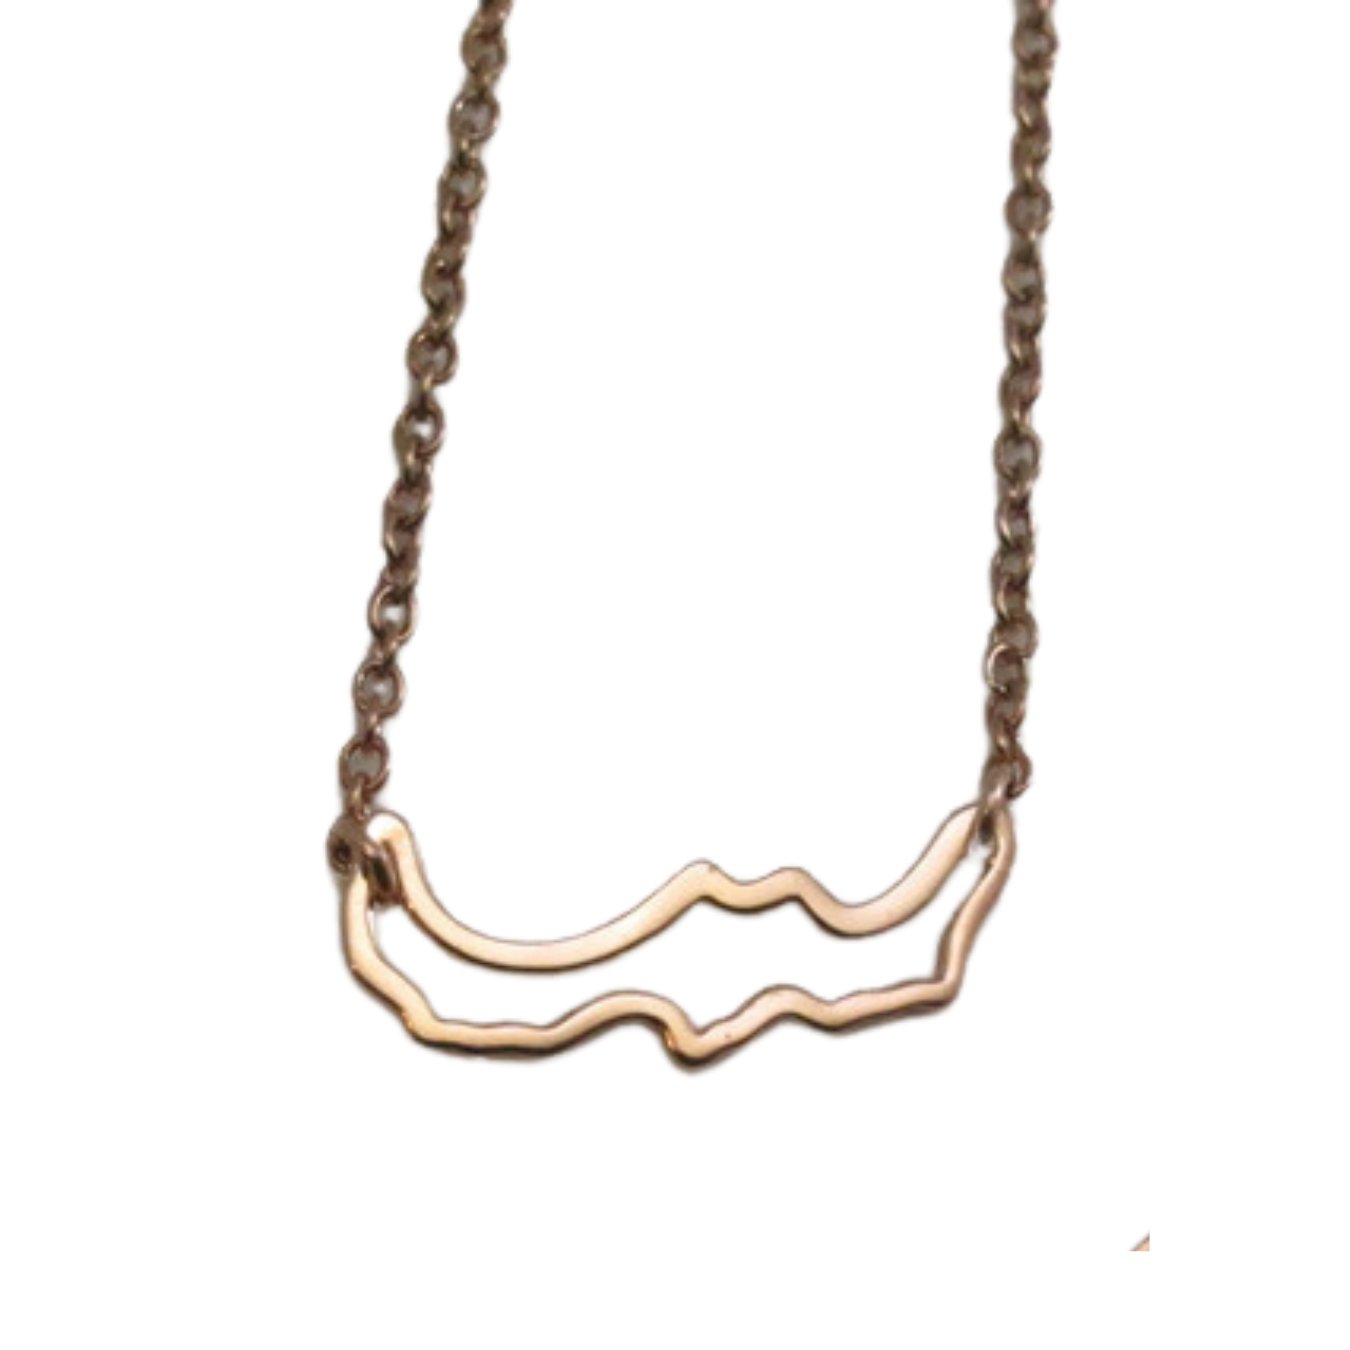 rose gold plated sterling silver petite Simply Savary adjustable necklace. Souvenir of Savary island